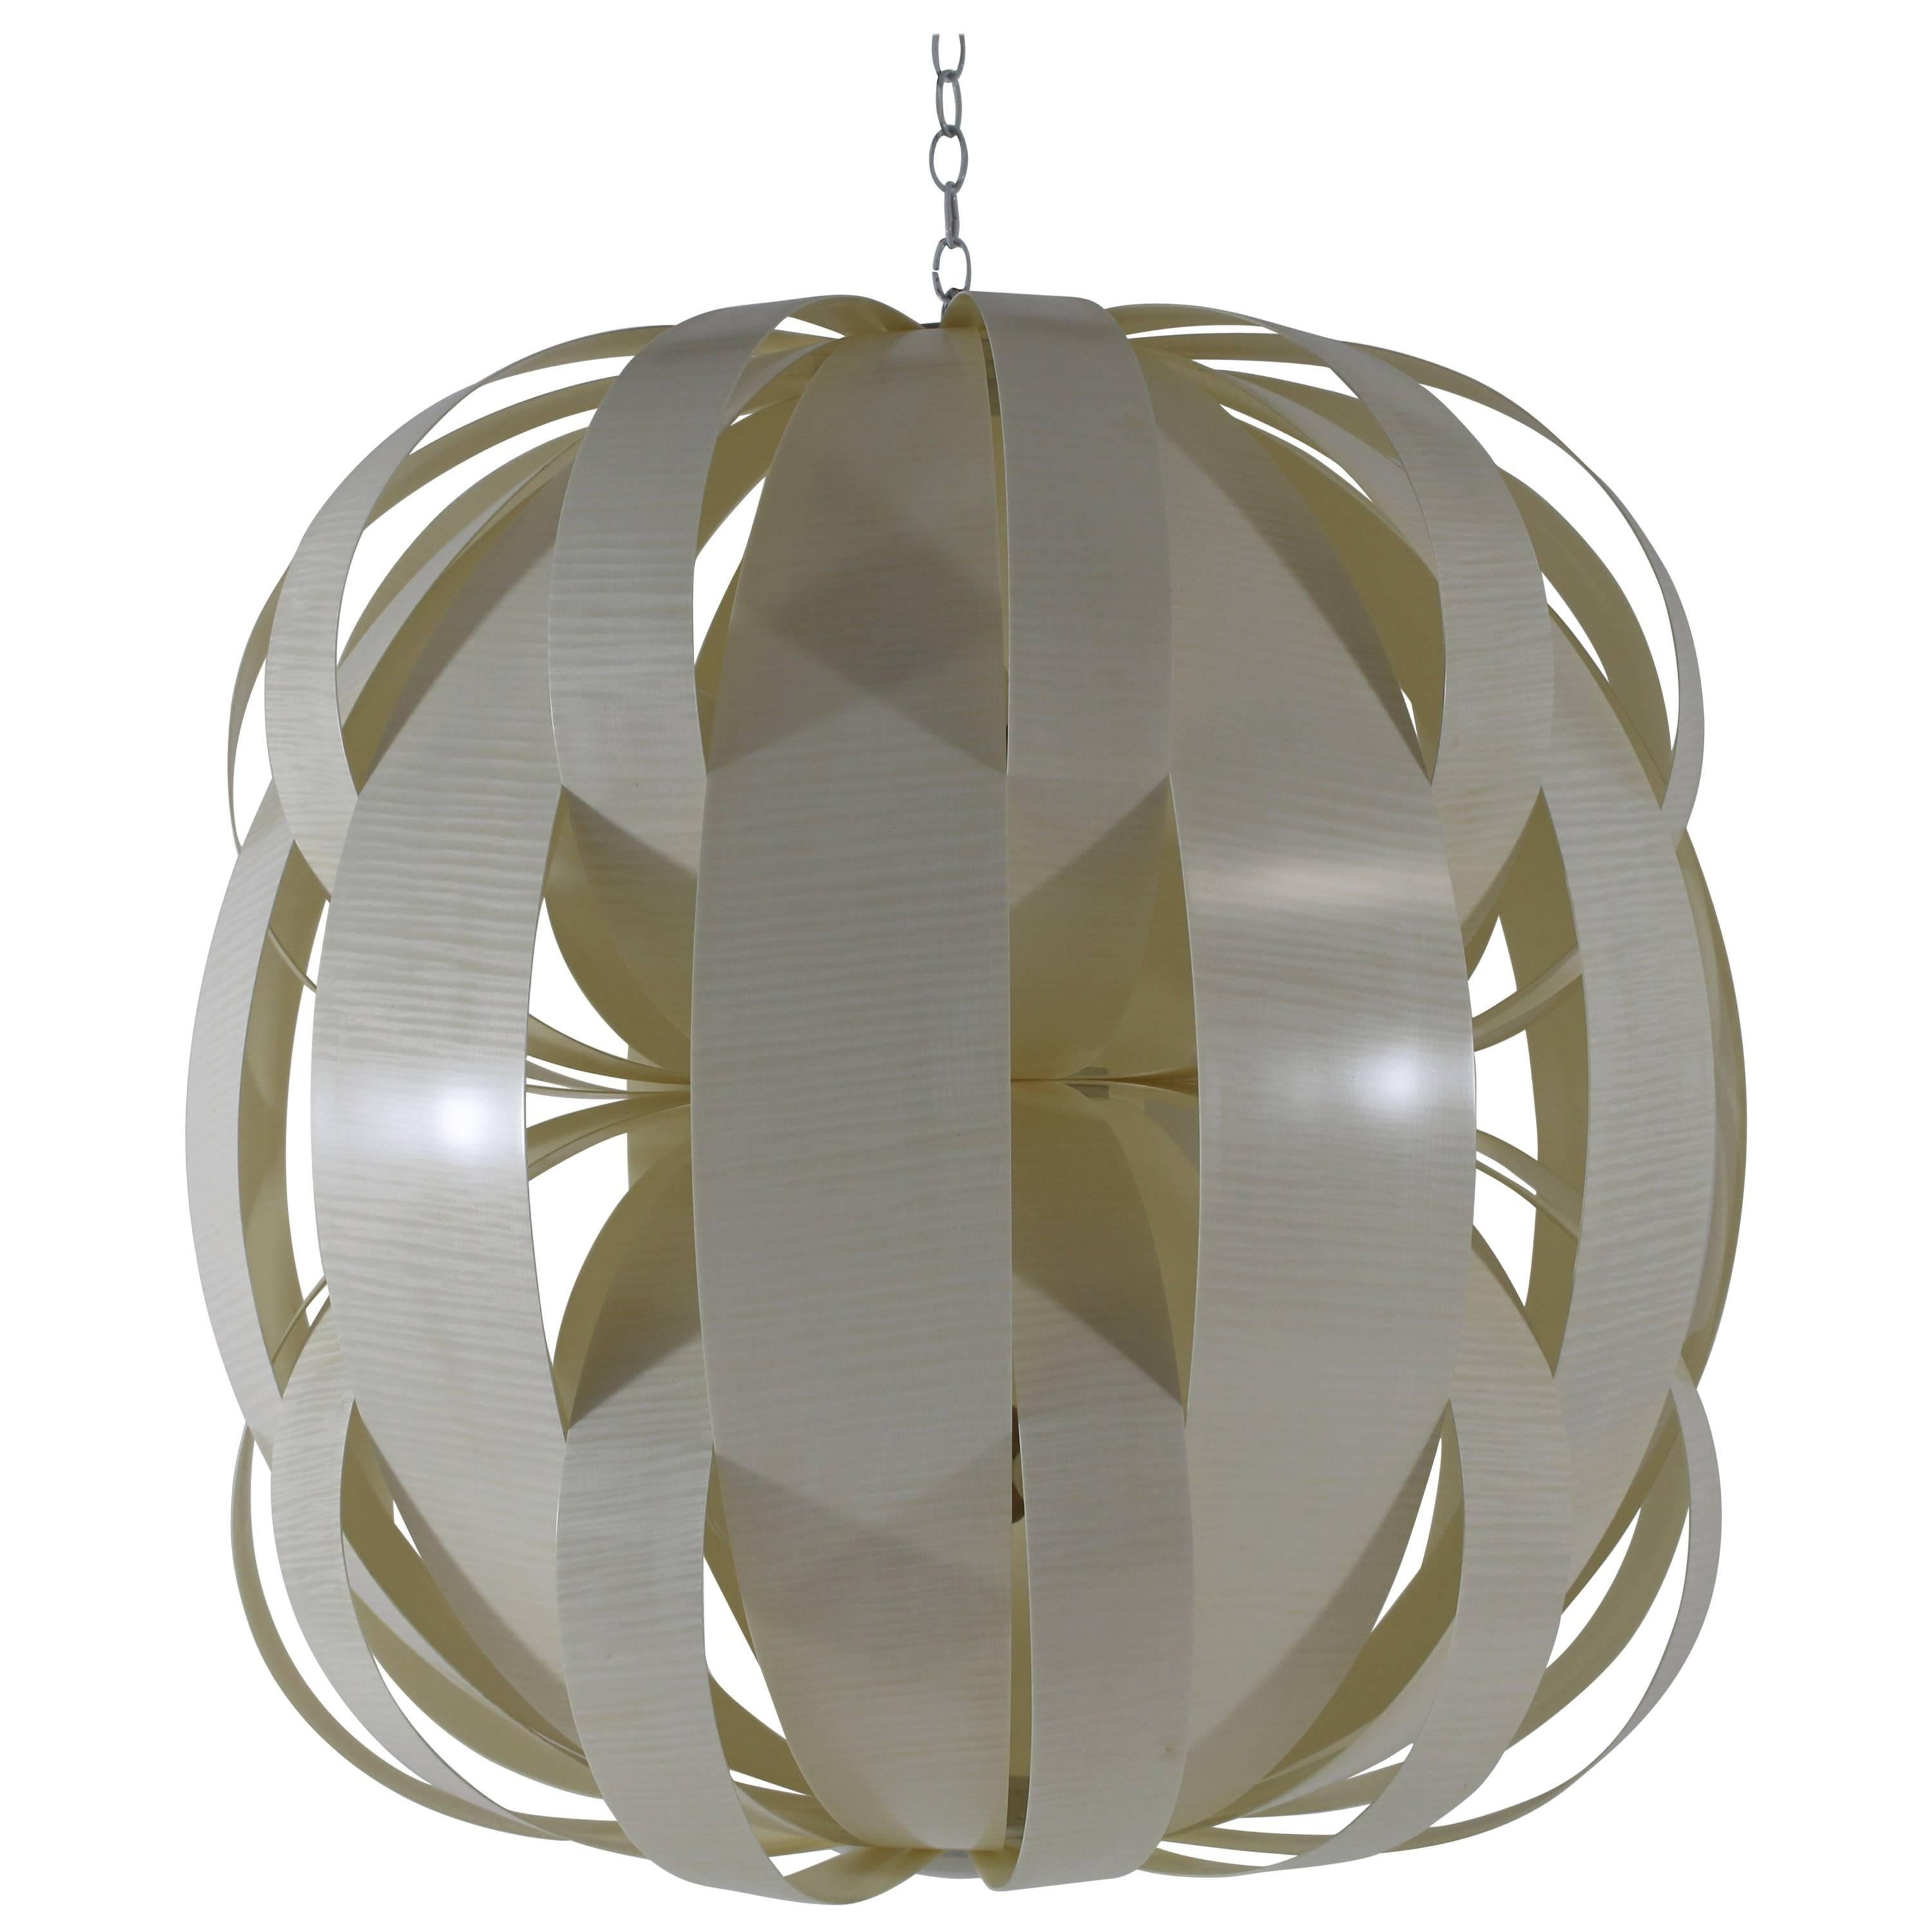 Luna Light Fixture in English Sycamore and Onyx For Sale